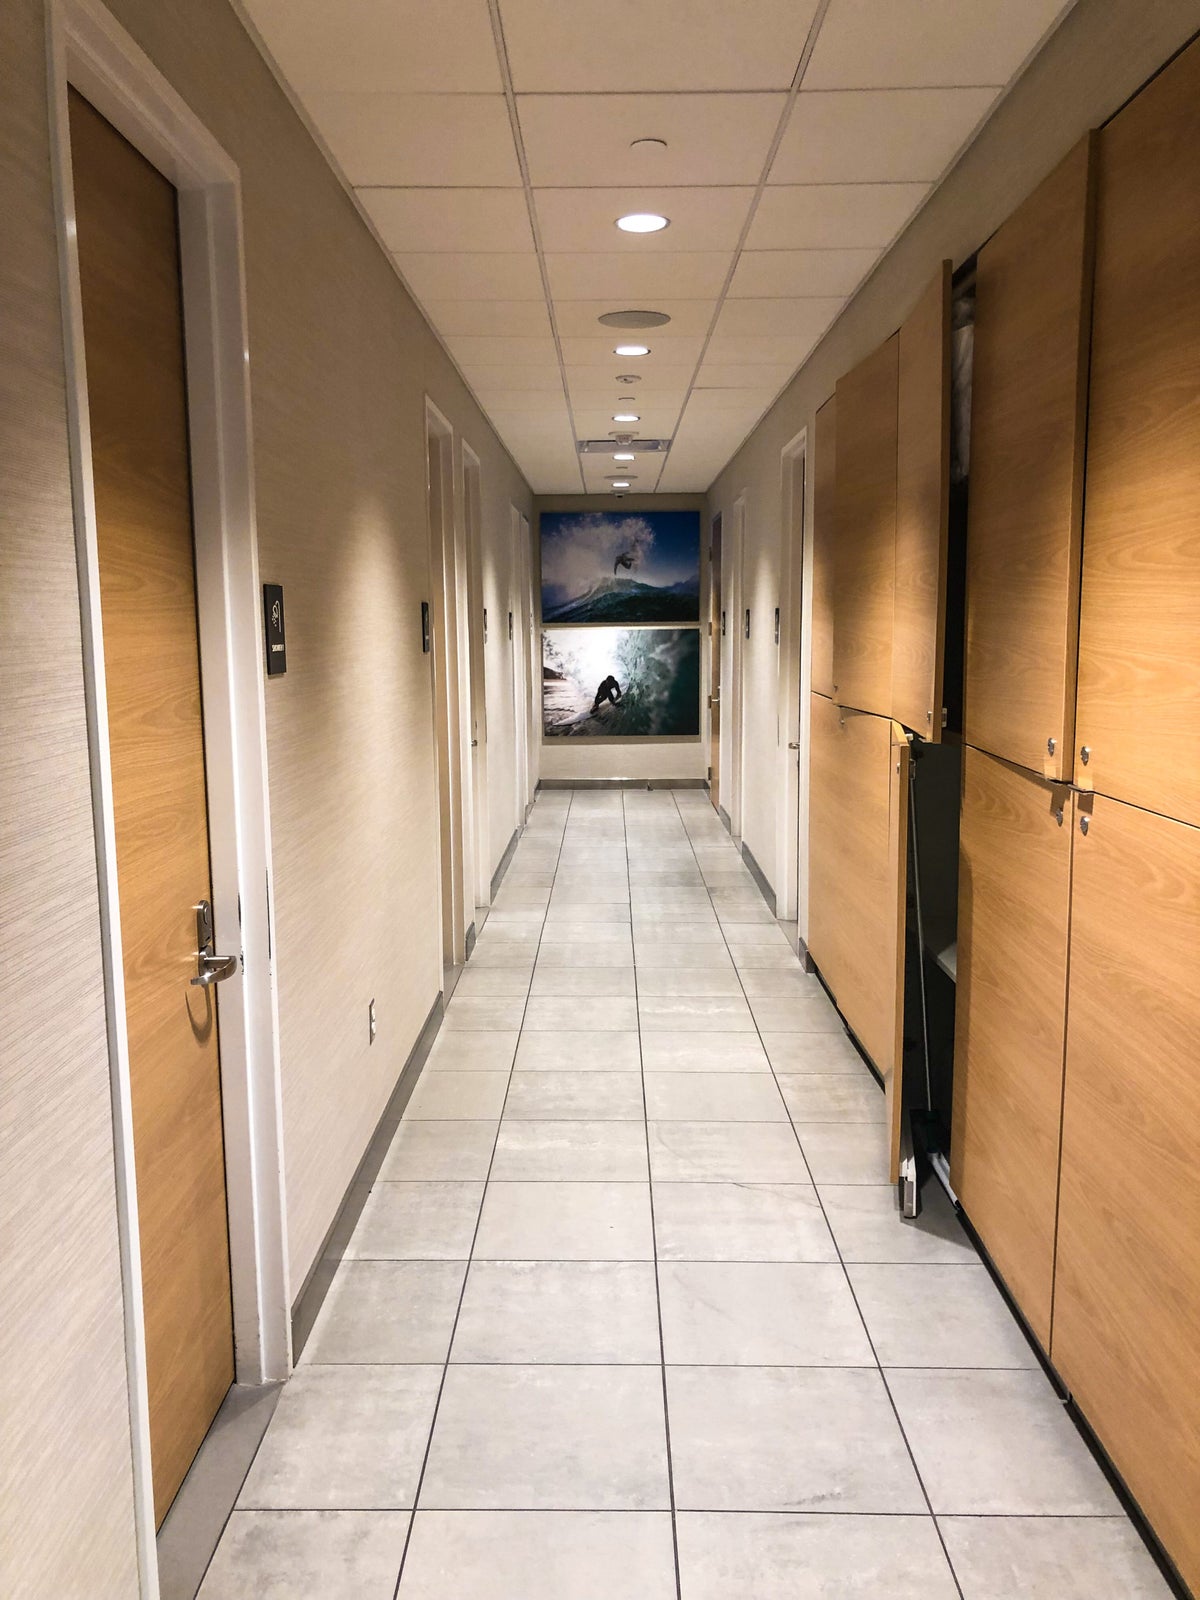 American Airlines Flagship Lounge LAX shower suites hallway